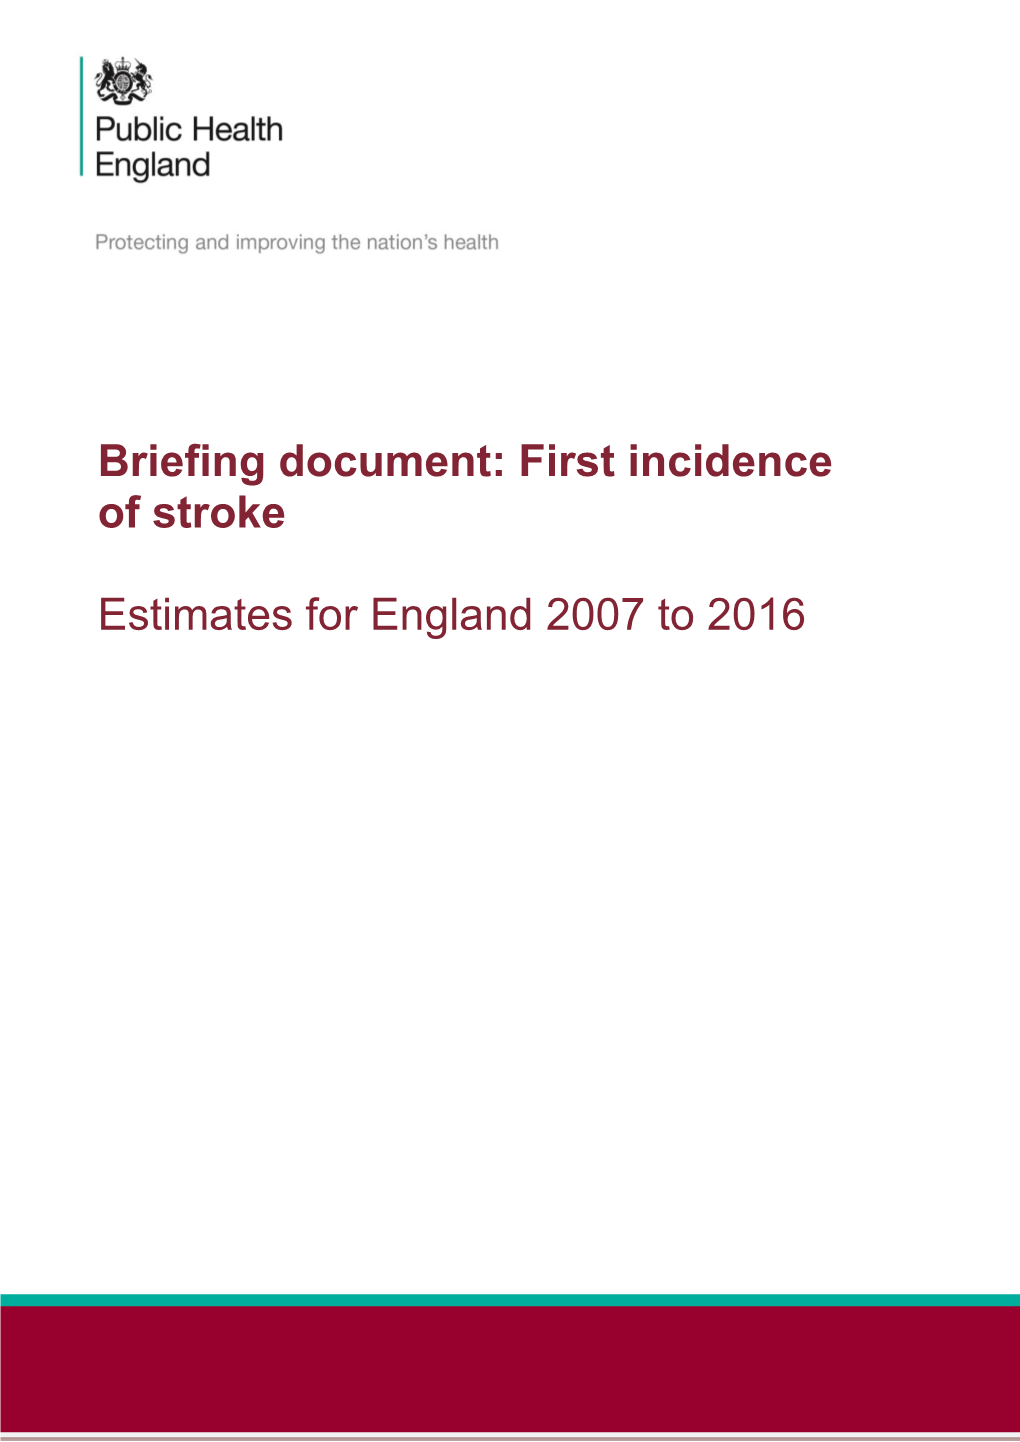 Briefing Document: First Incidence of Stroke